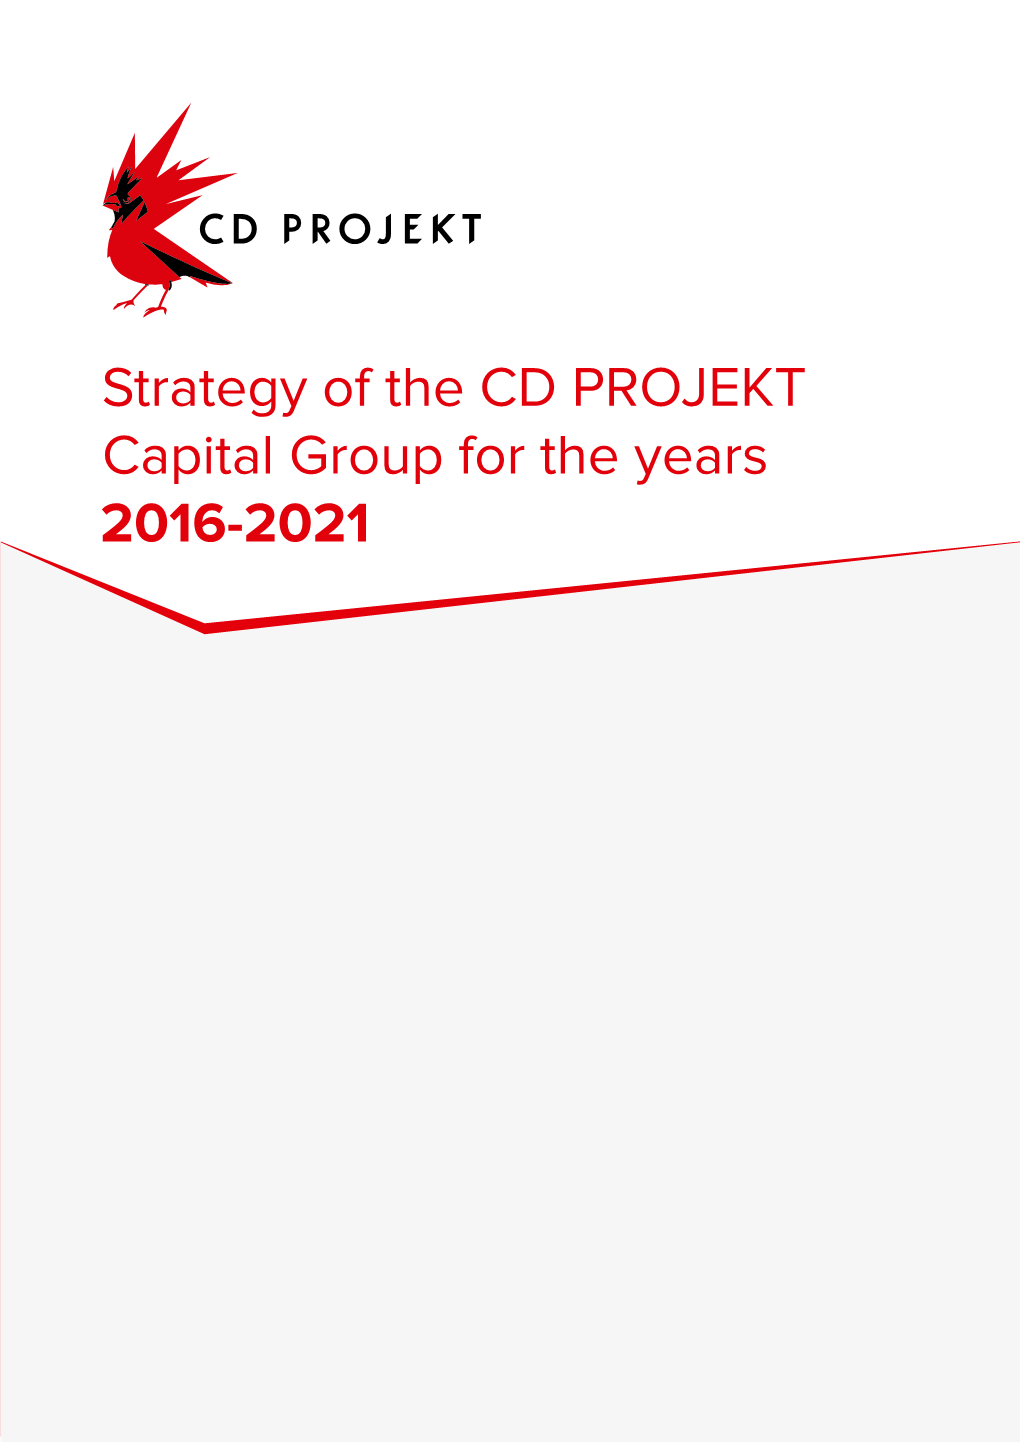 PDF CD PROJEKT Capital Group Strategy for the Years 2016-2021